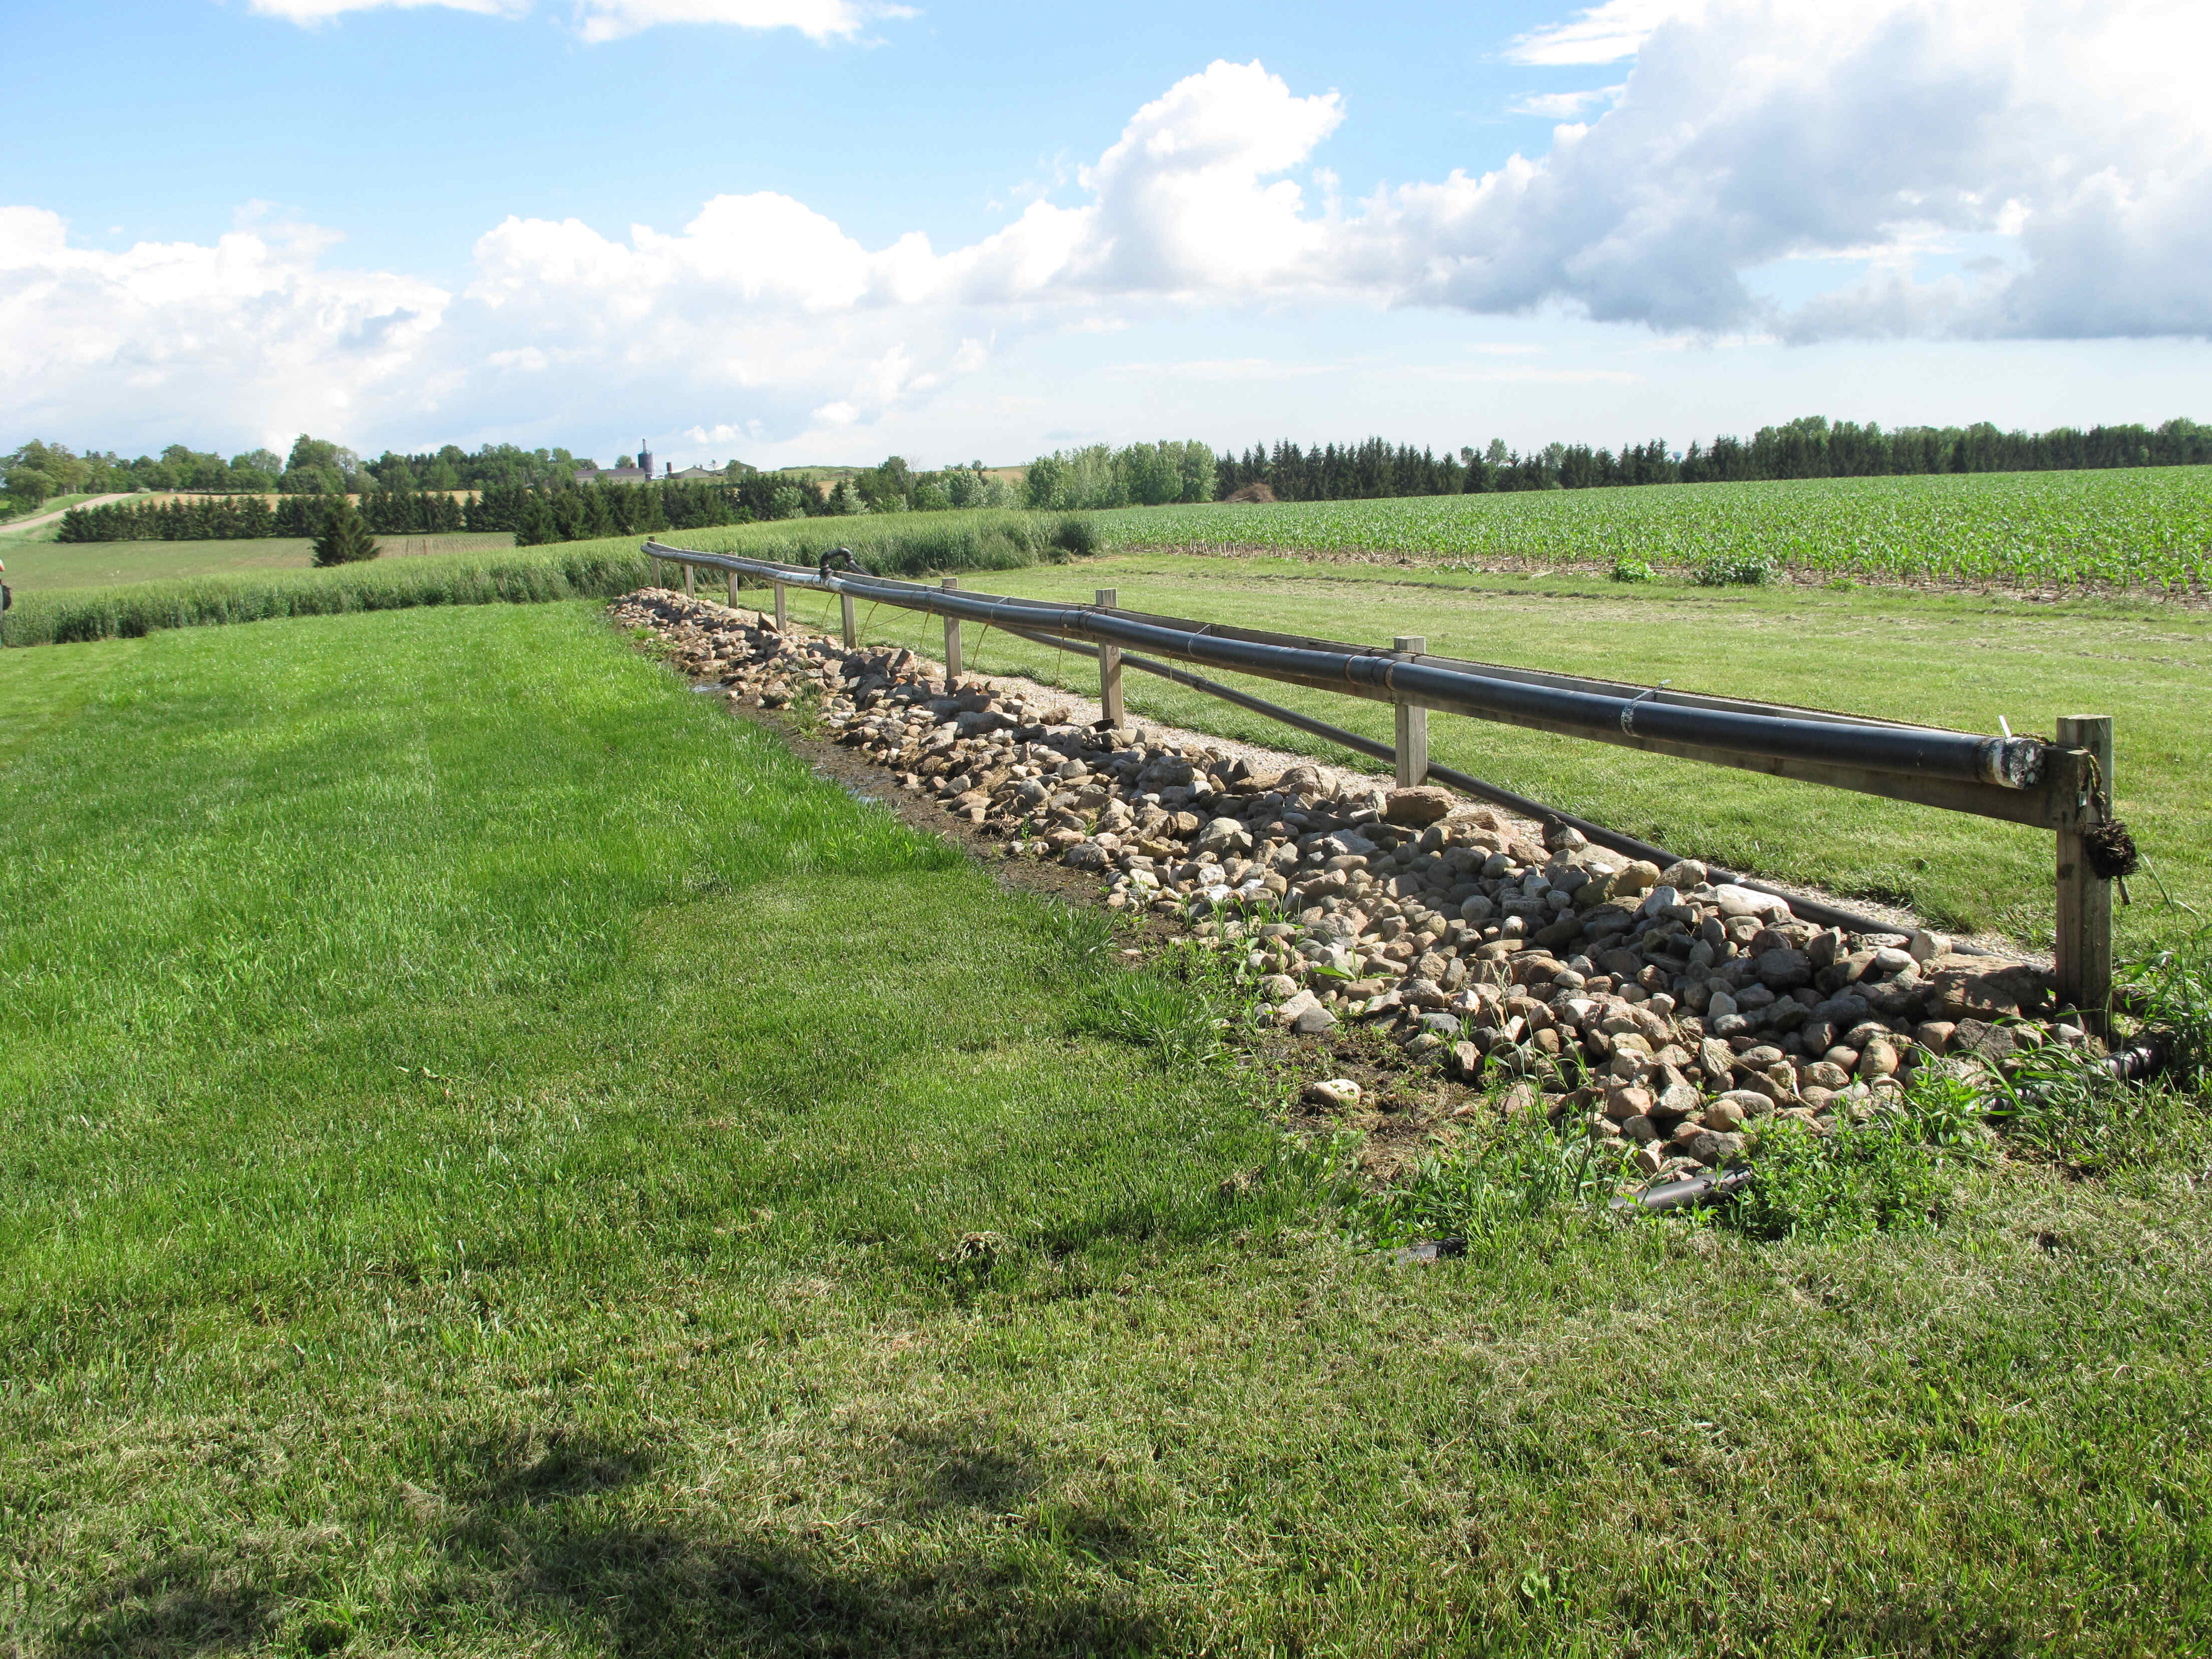 Length of a vegetated filter pipe that sits above the ground on wood supports in a field; the ground immediately below the pipe is covered with gravel to enhance drainage